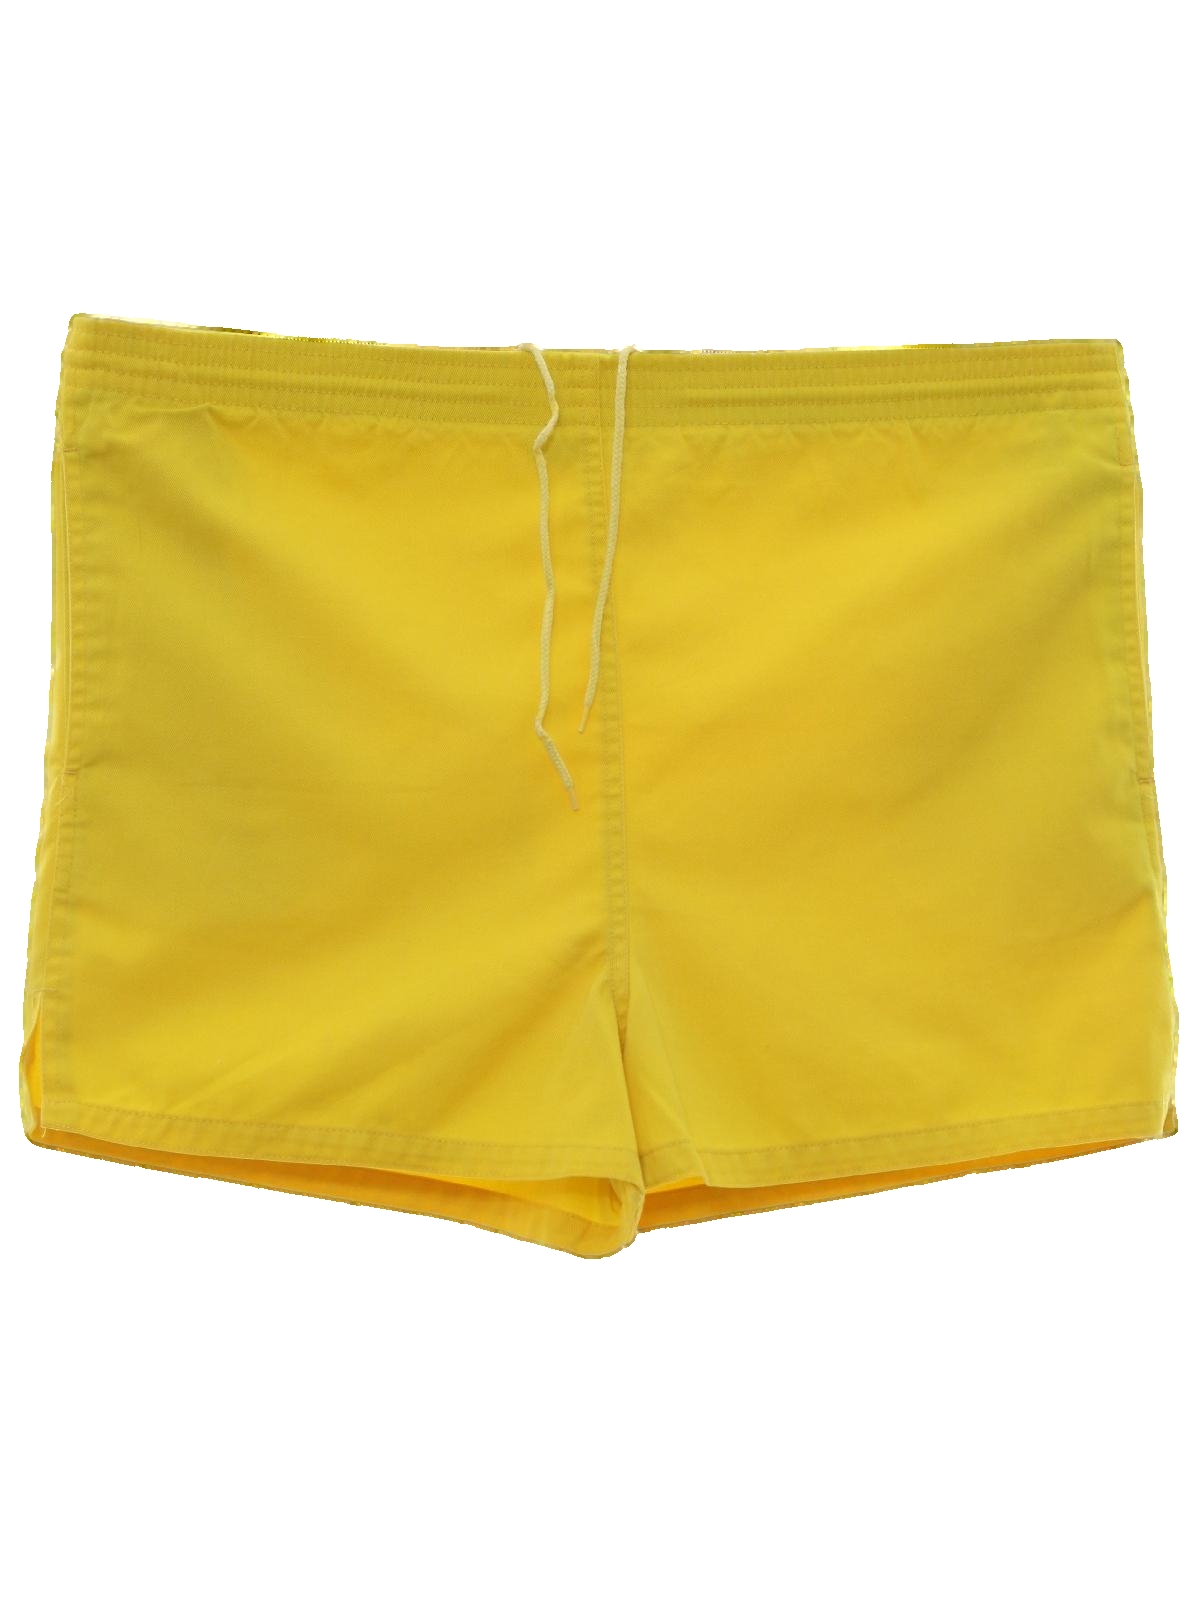 Pacer Eighties Vintage Shorts: 80s -Pacer- Mens yellow background ...